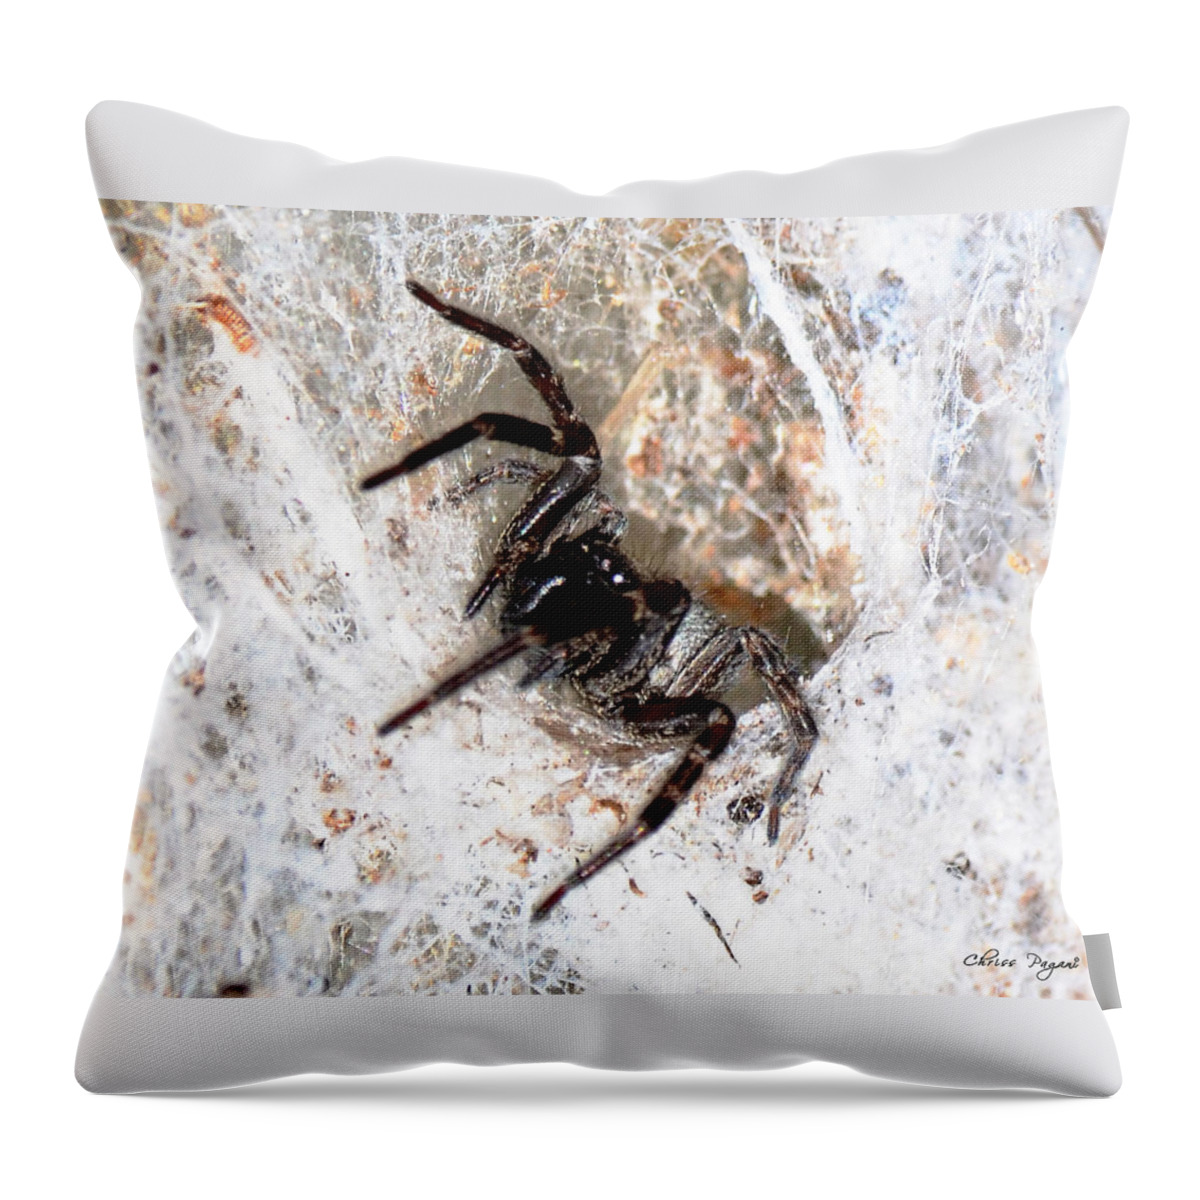 Web Throw Pillow featuring the photograph Spiders Trap by Chriss Pagani